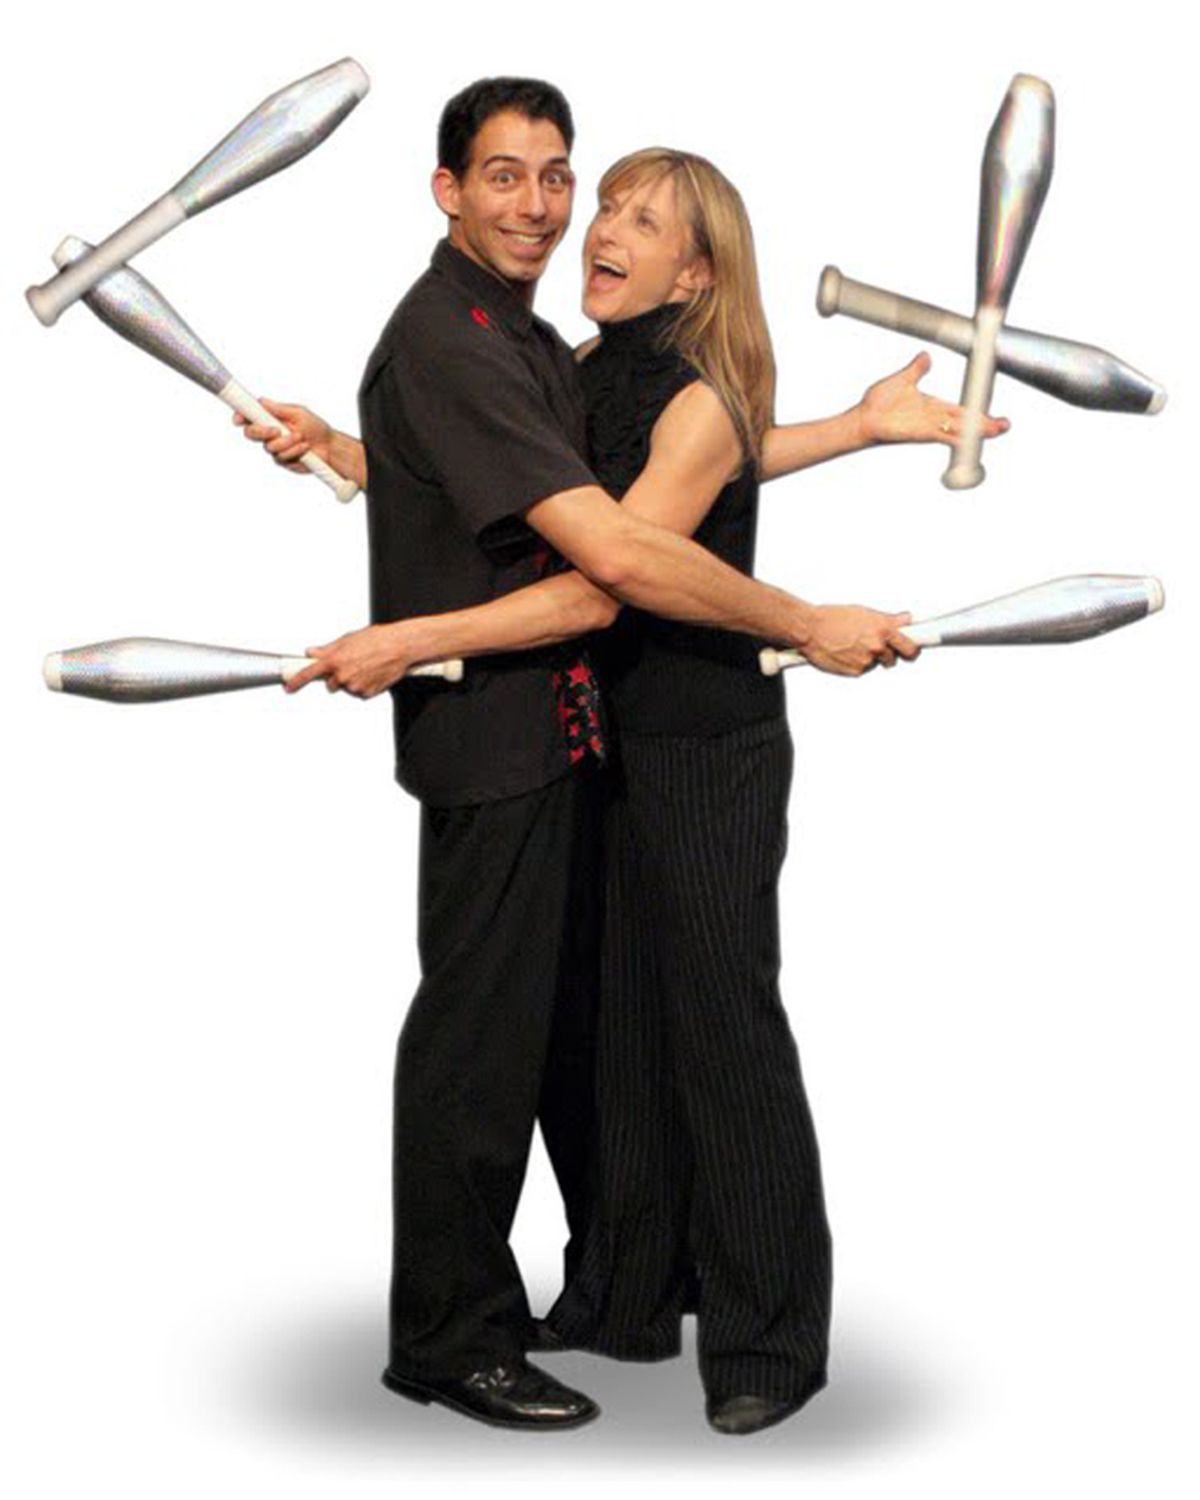 Jack and Jeri Kalvan describe their show as “what happens when a comedian/juggler marries an acrobat/aerialist.”Courtesy of Jack and Jeri Kalvan (Courtesy of Jack and Jeri Kalvan)